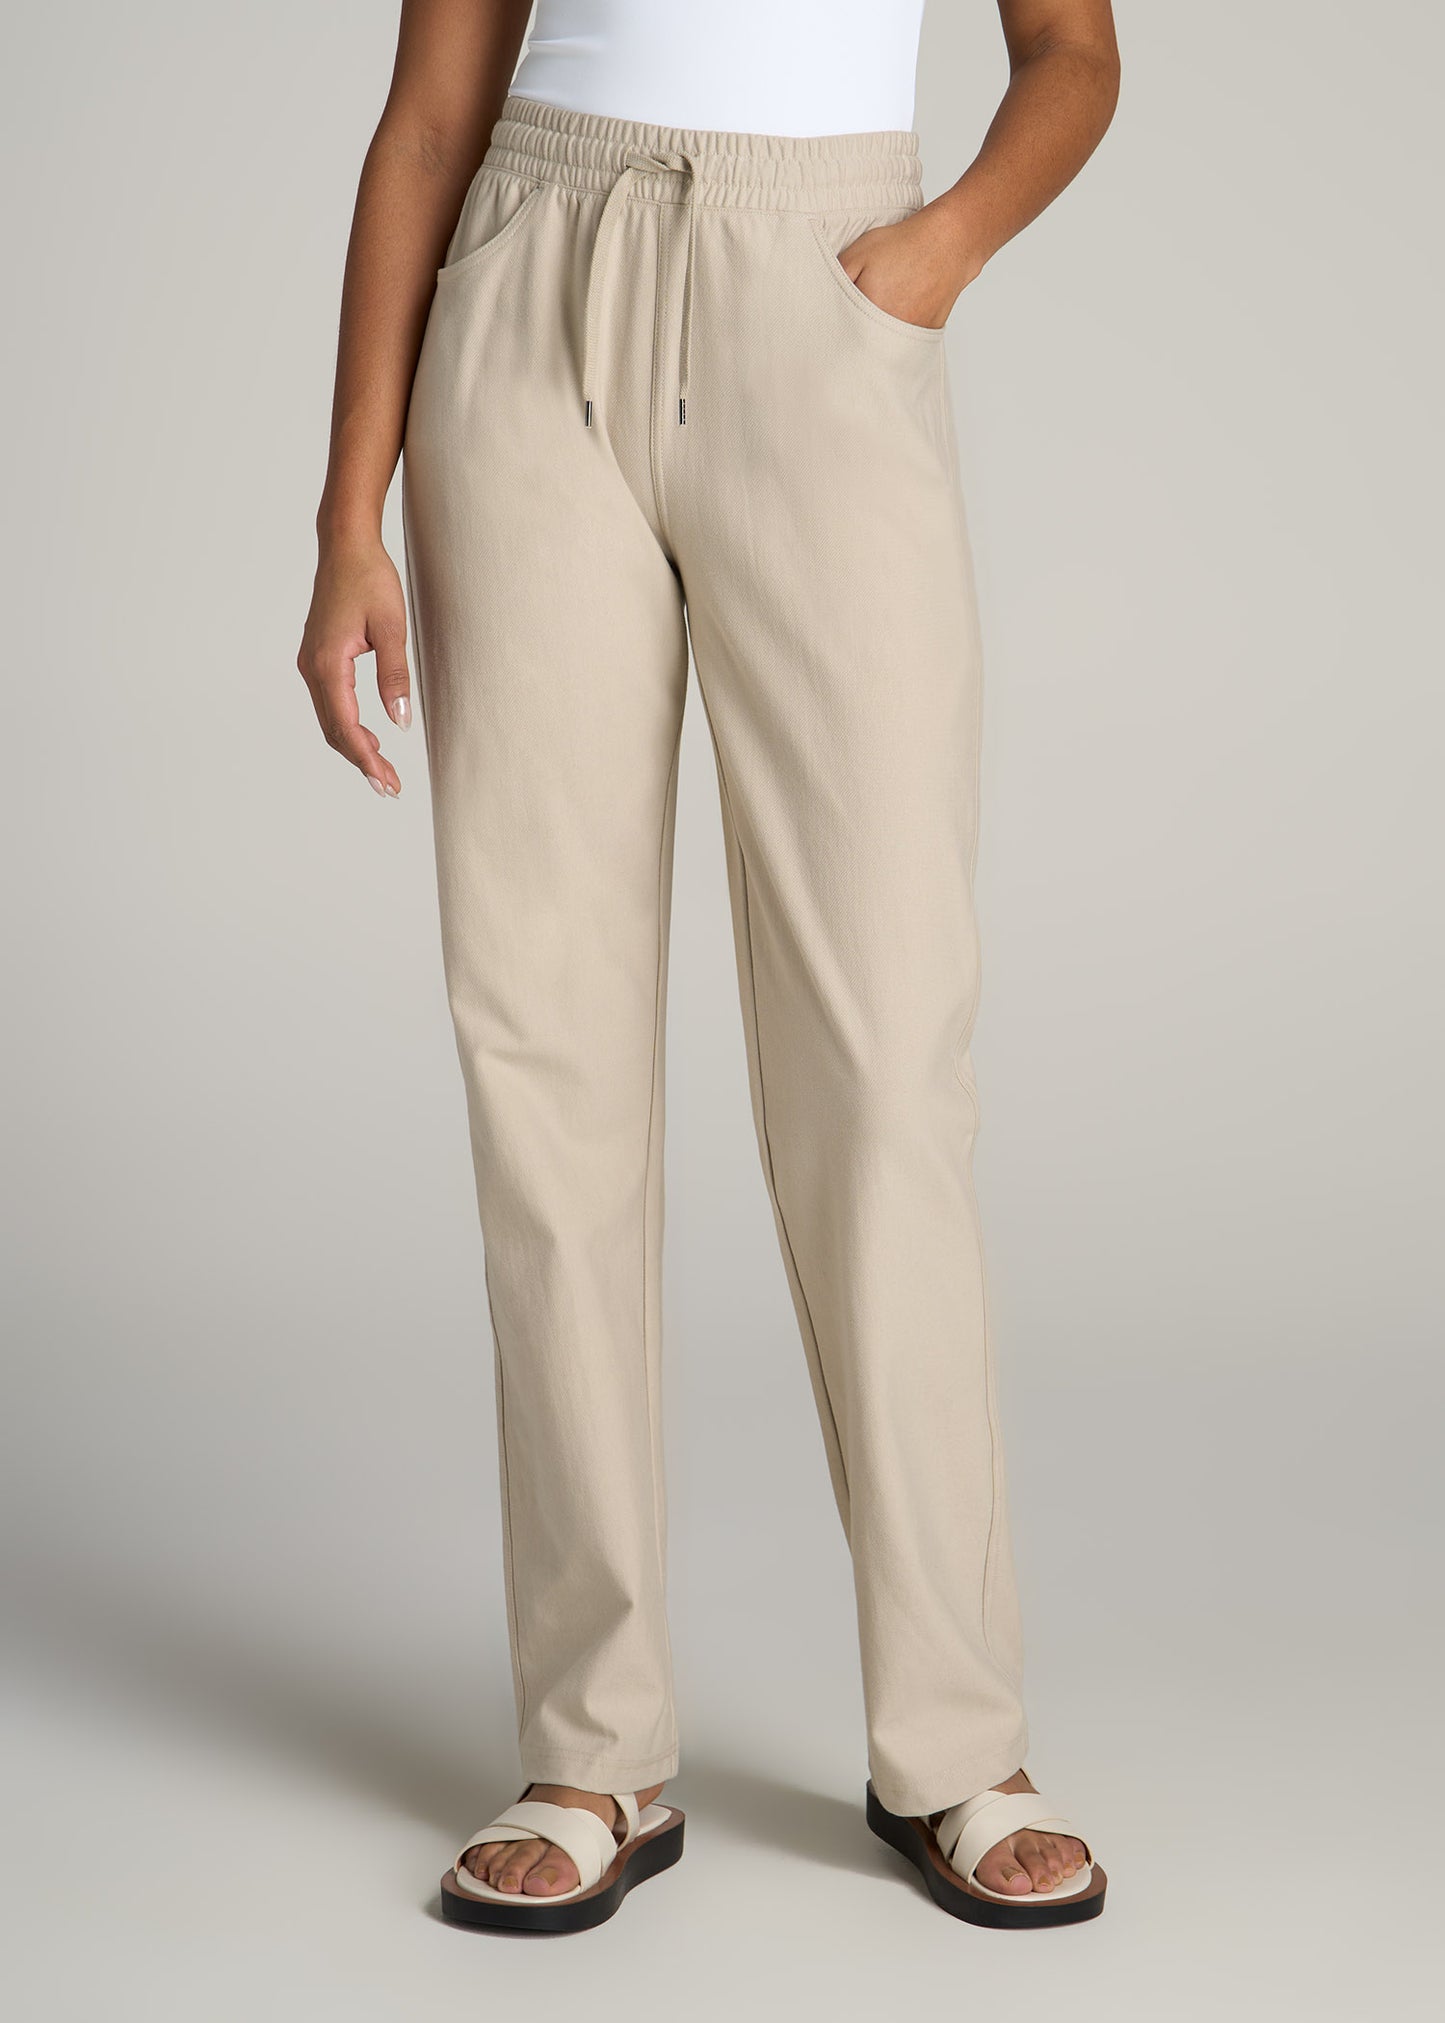 Pull-On Straight Leg Knit Pants for Tall Women in Stone